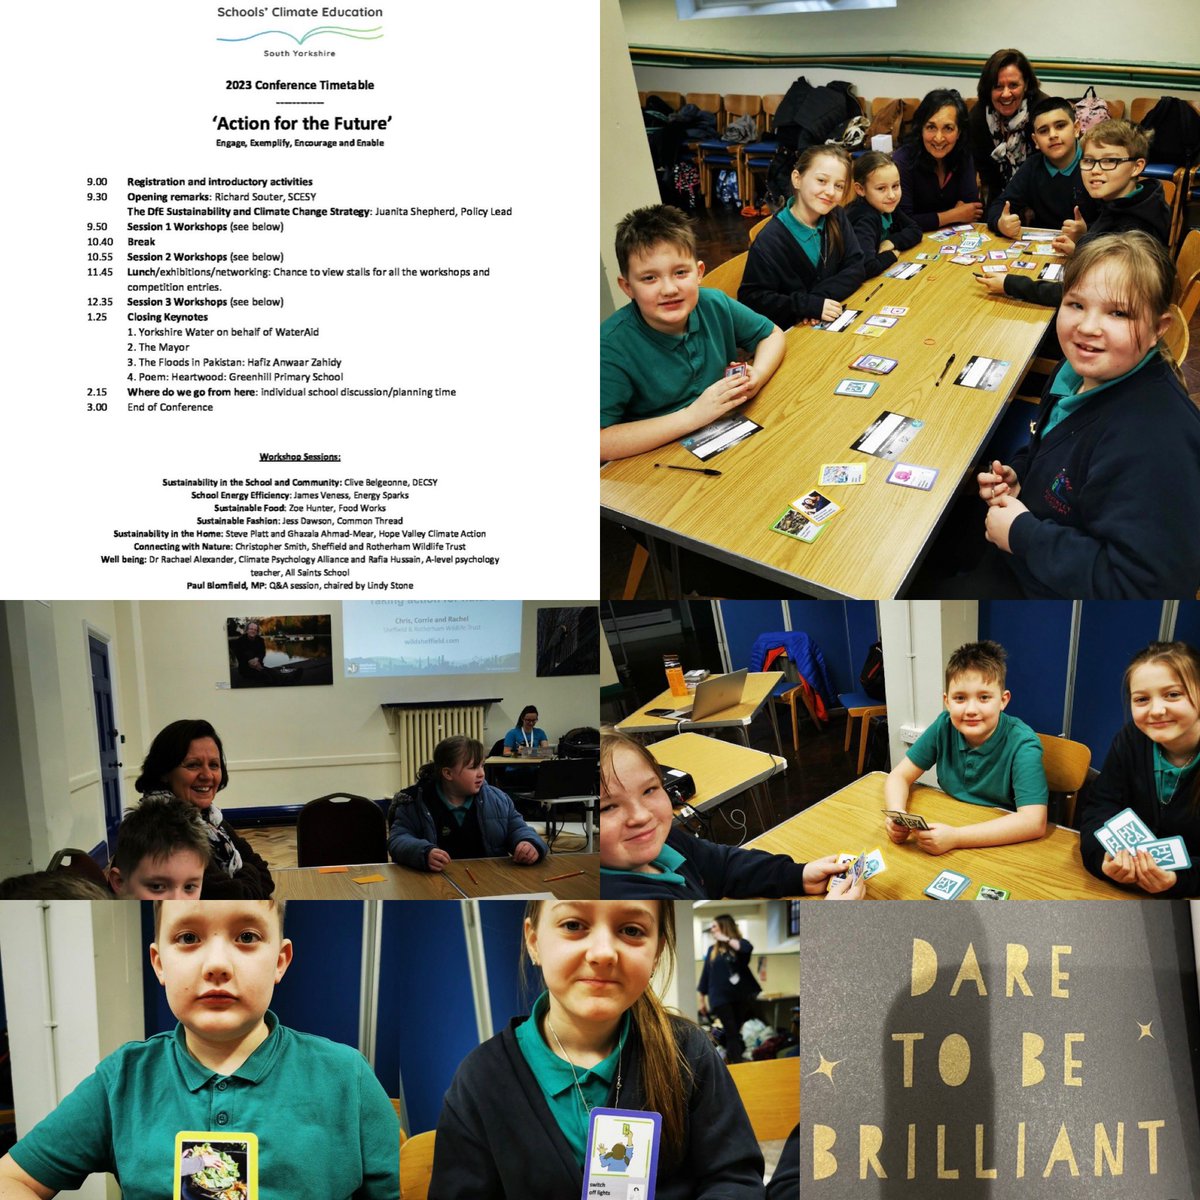 Our Eco Ambassadors had a brilliant time at the School’s Climate Education conference today in Sheffield. They have so many ideas and can’t wait to feed these back to the school community. #pupilleadership #personaldevelopment #beingbrilliant #astreagogreen 🌍⭐️